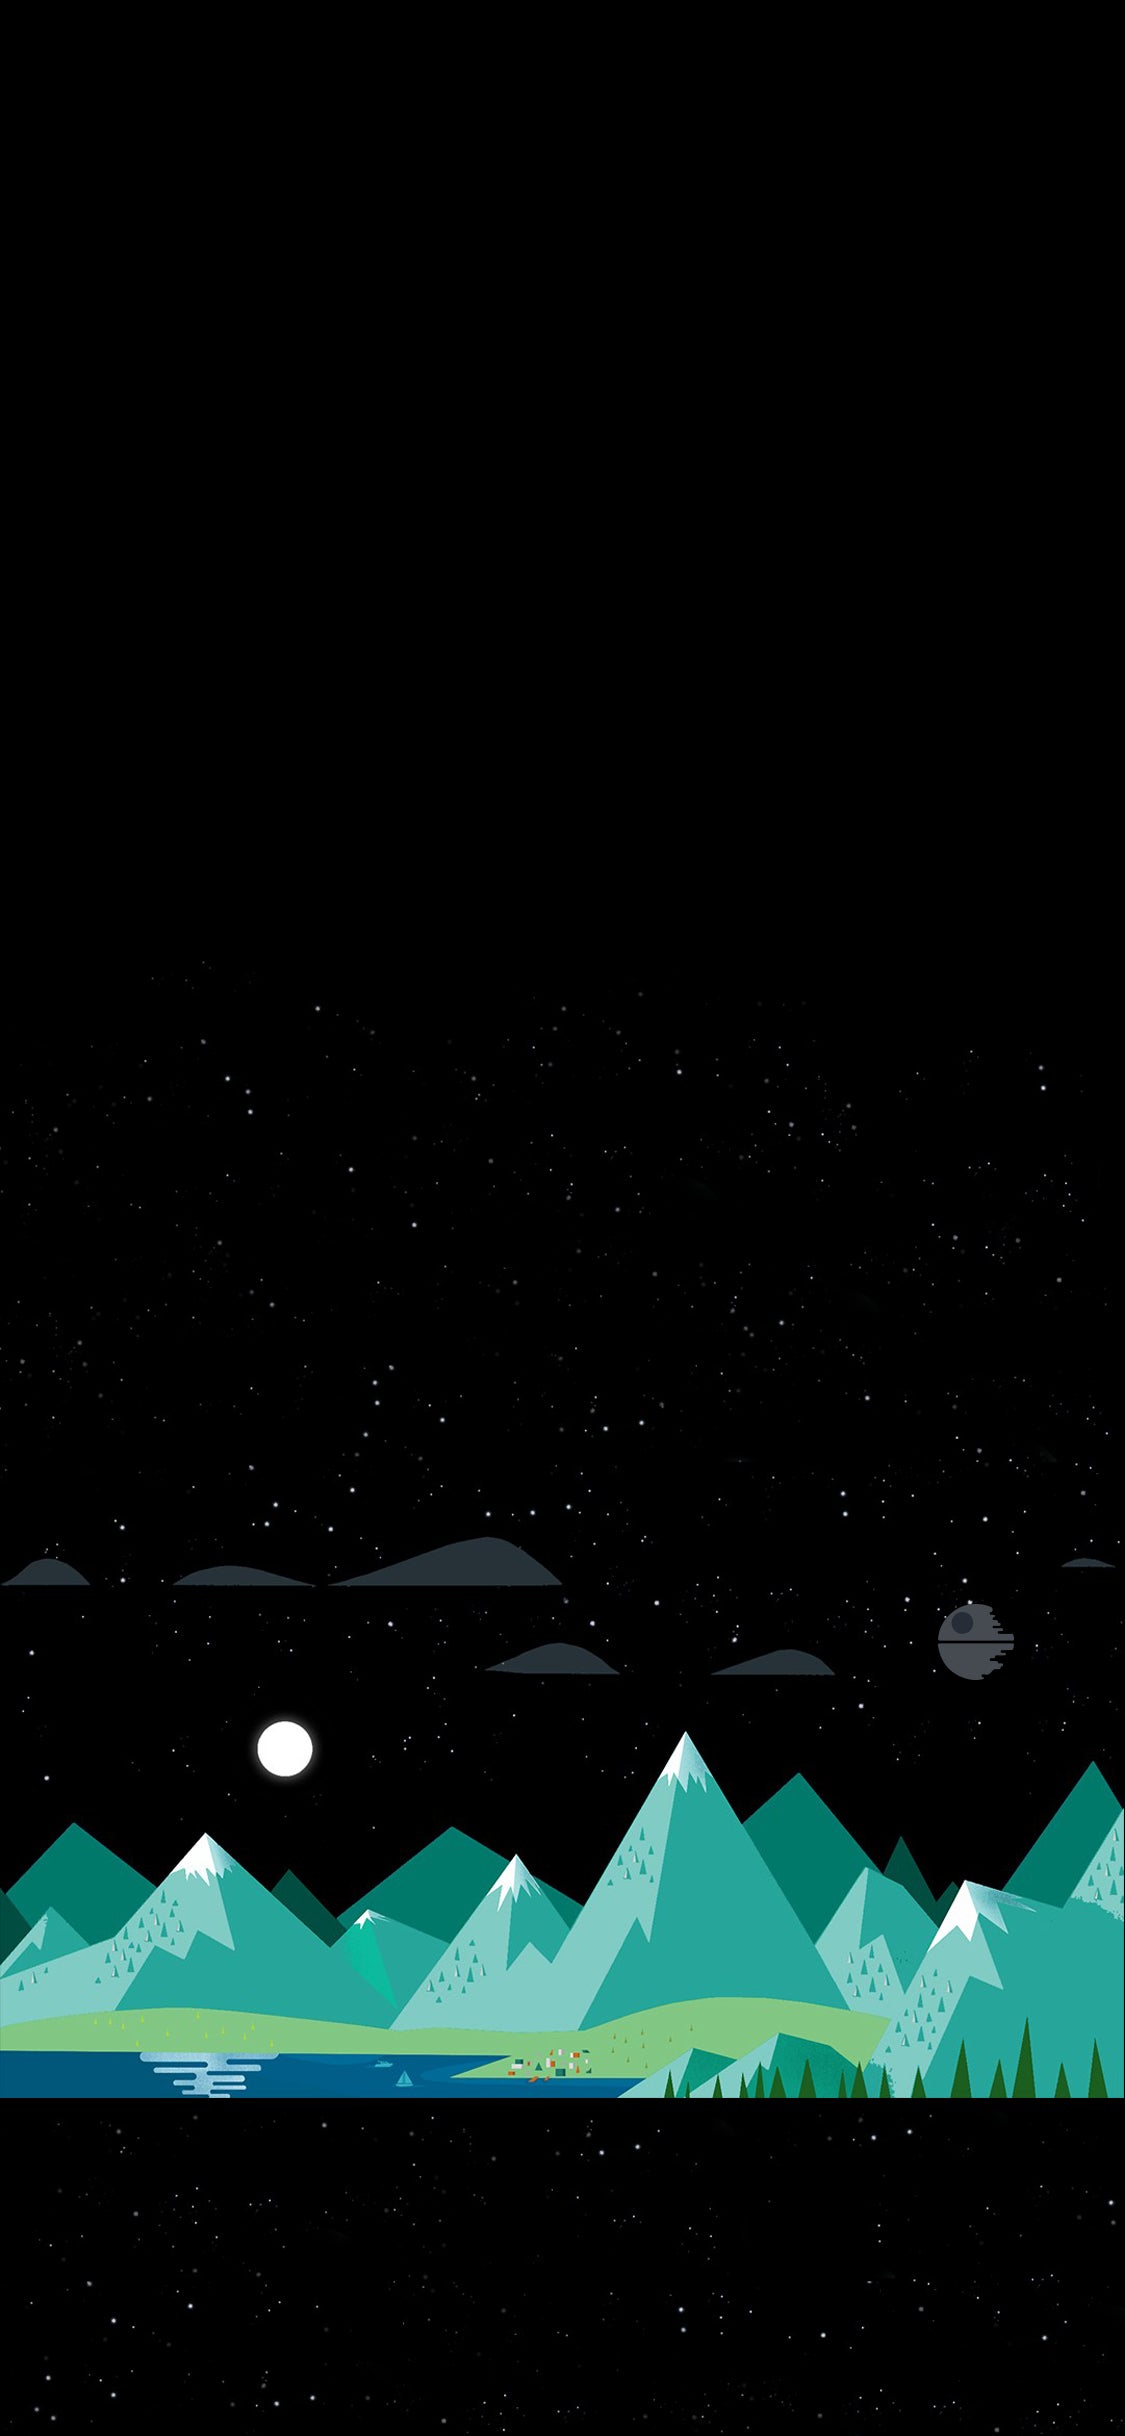 Subtle Death Star wallpaper for iPhone x - [1125 × 2436]